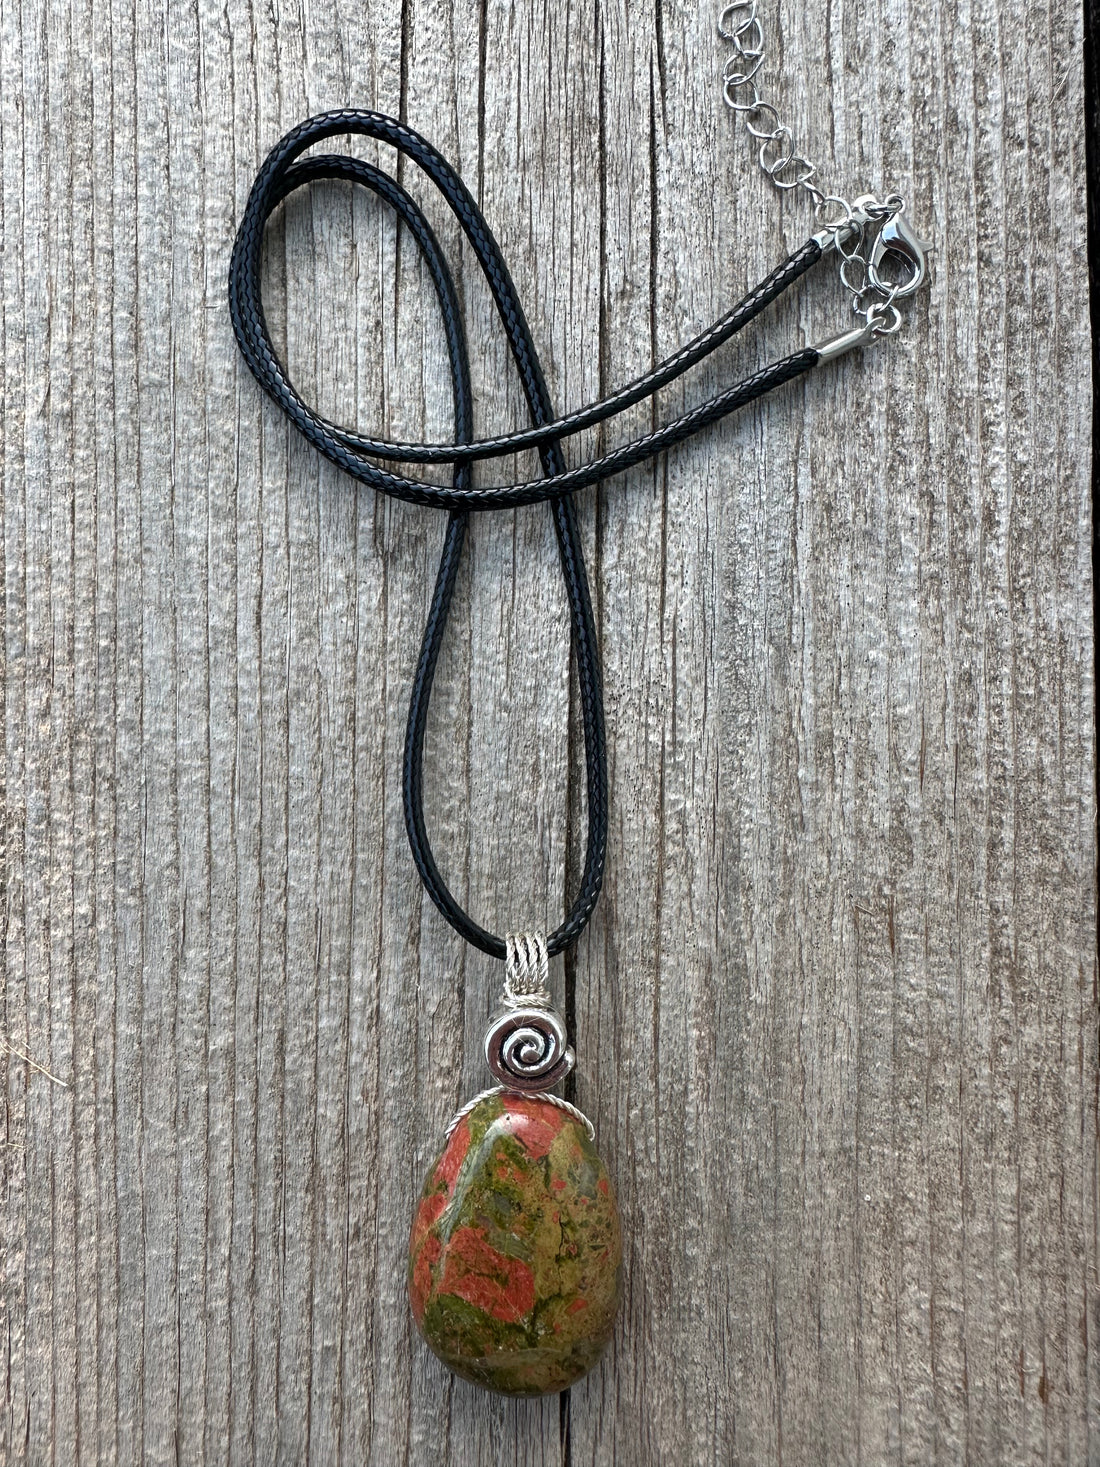 Unakite Necklace for Balance and Rebirth